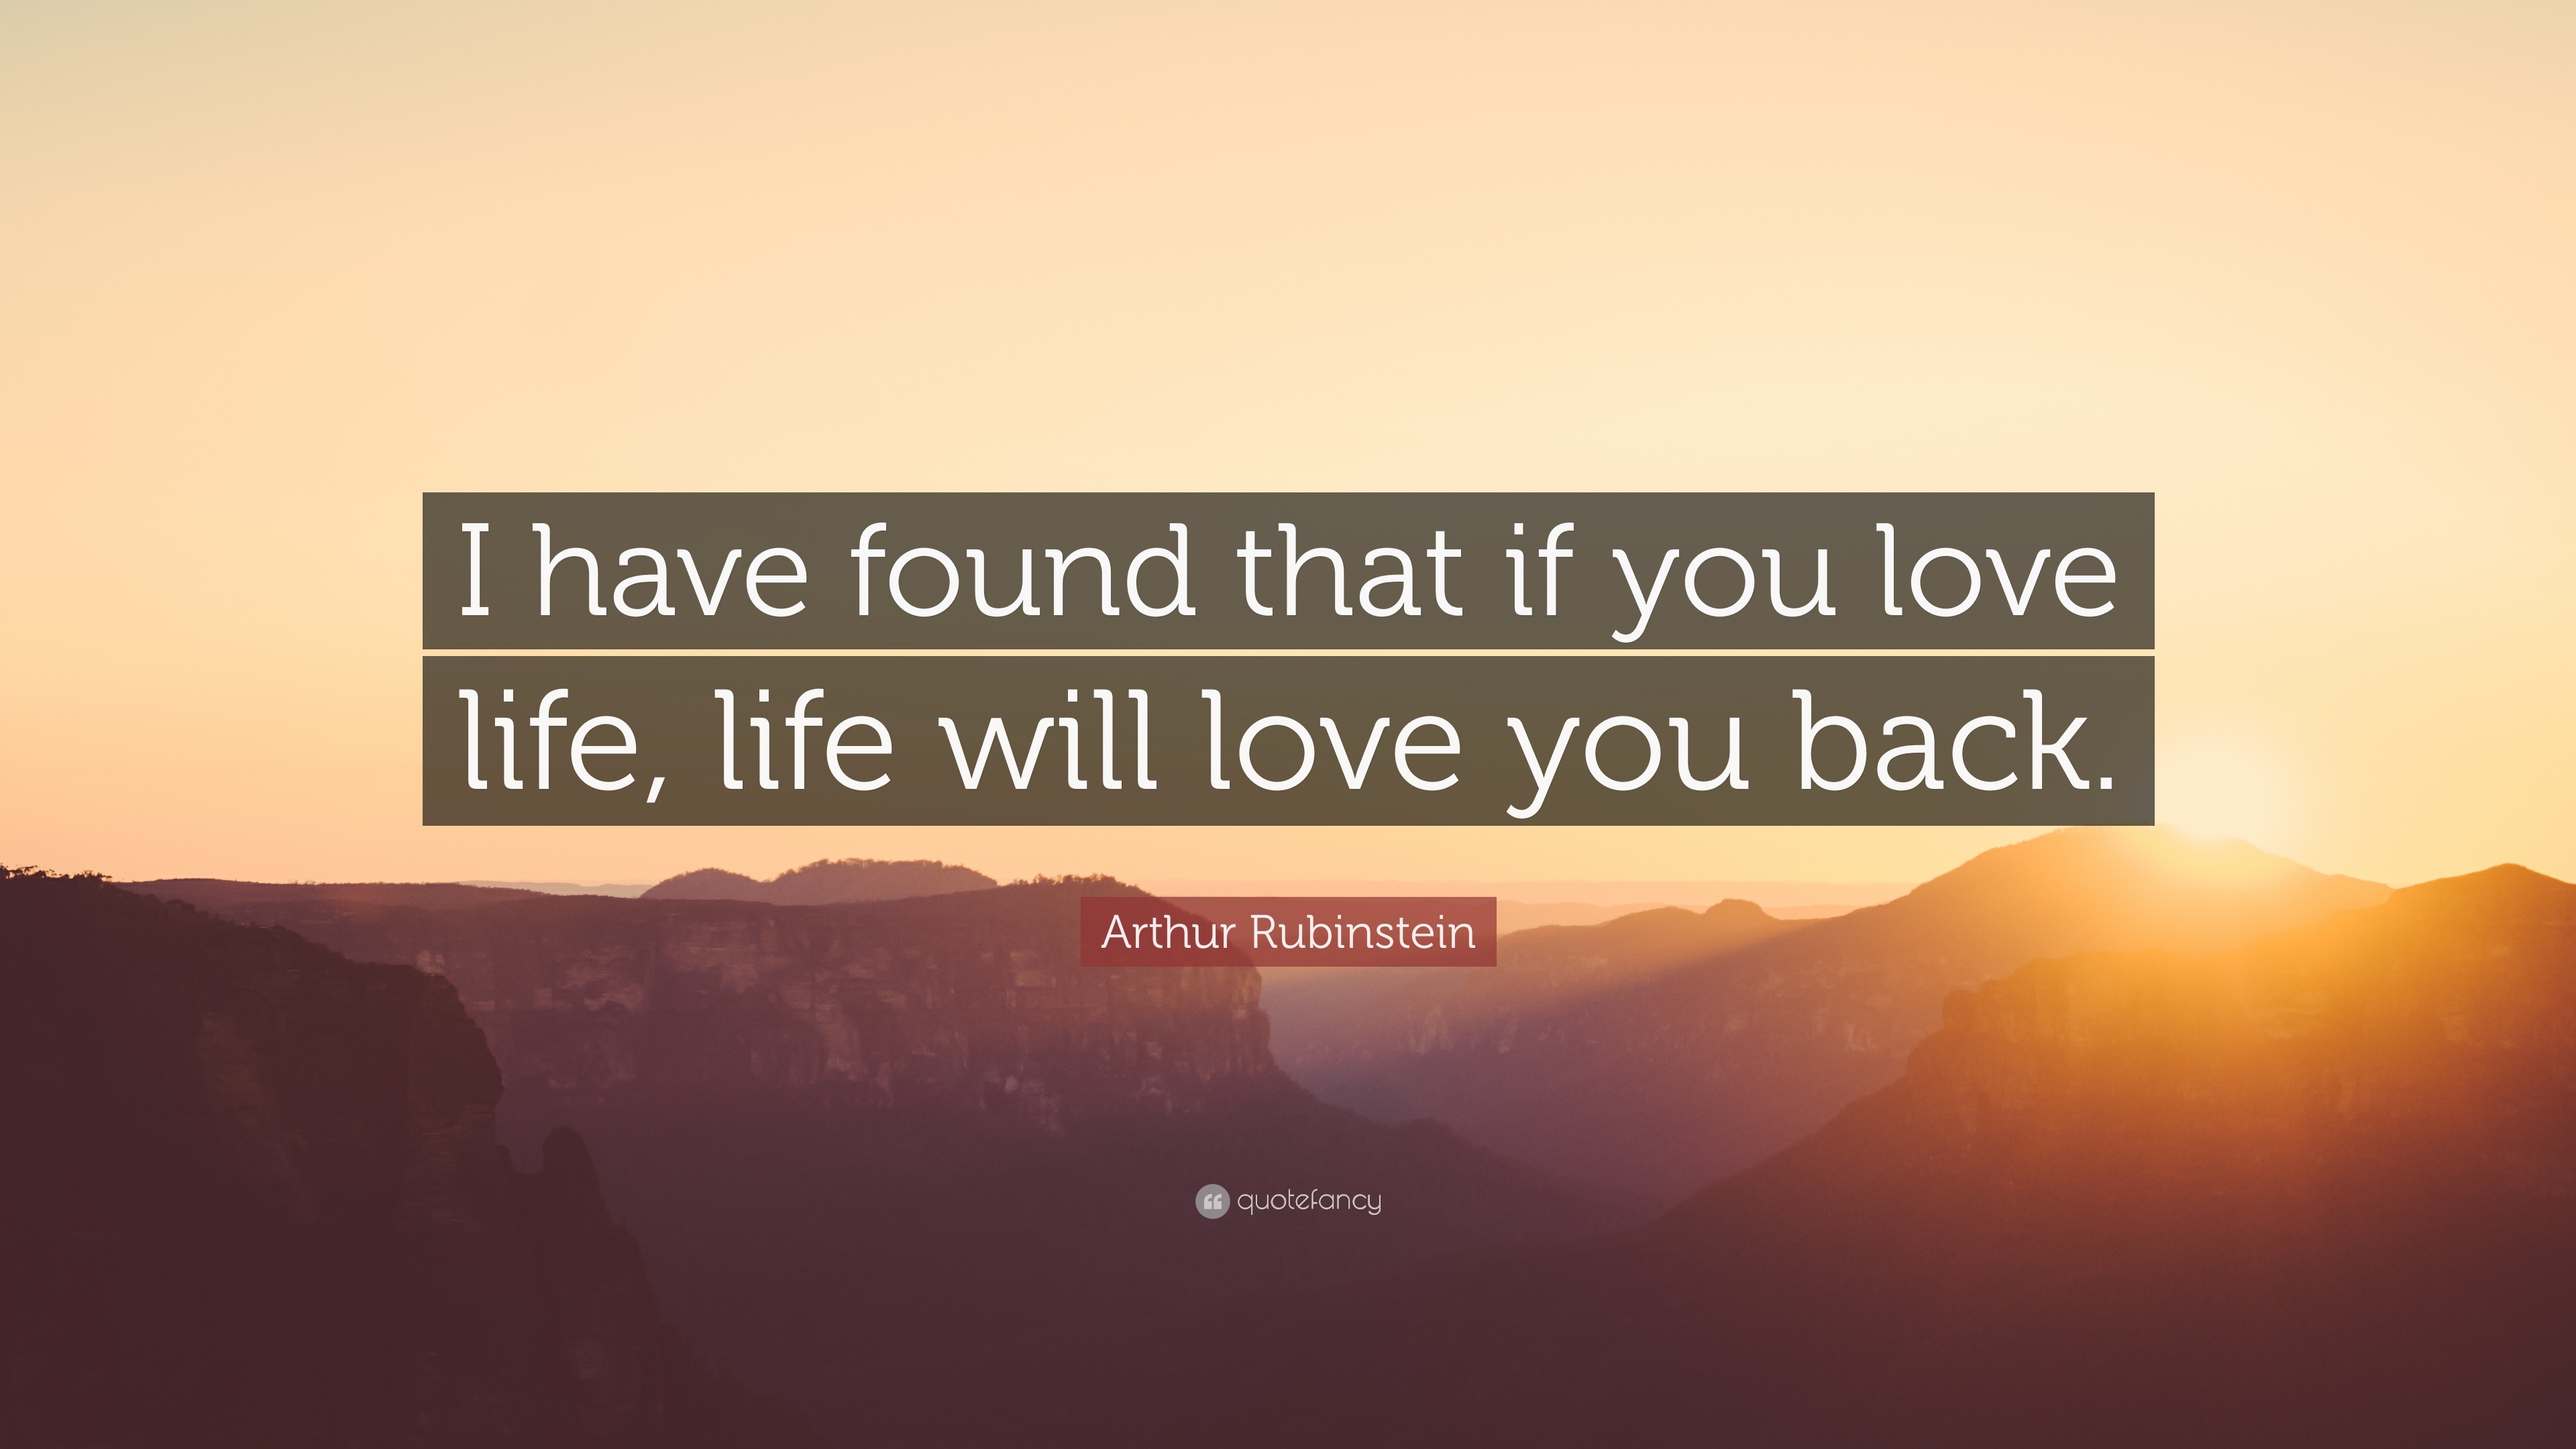 Arthur Rubinstein Quote “I have found that if you love life life will